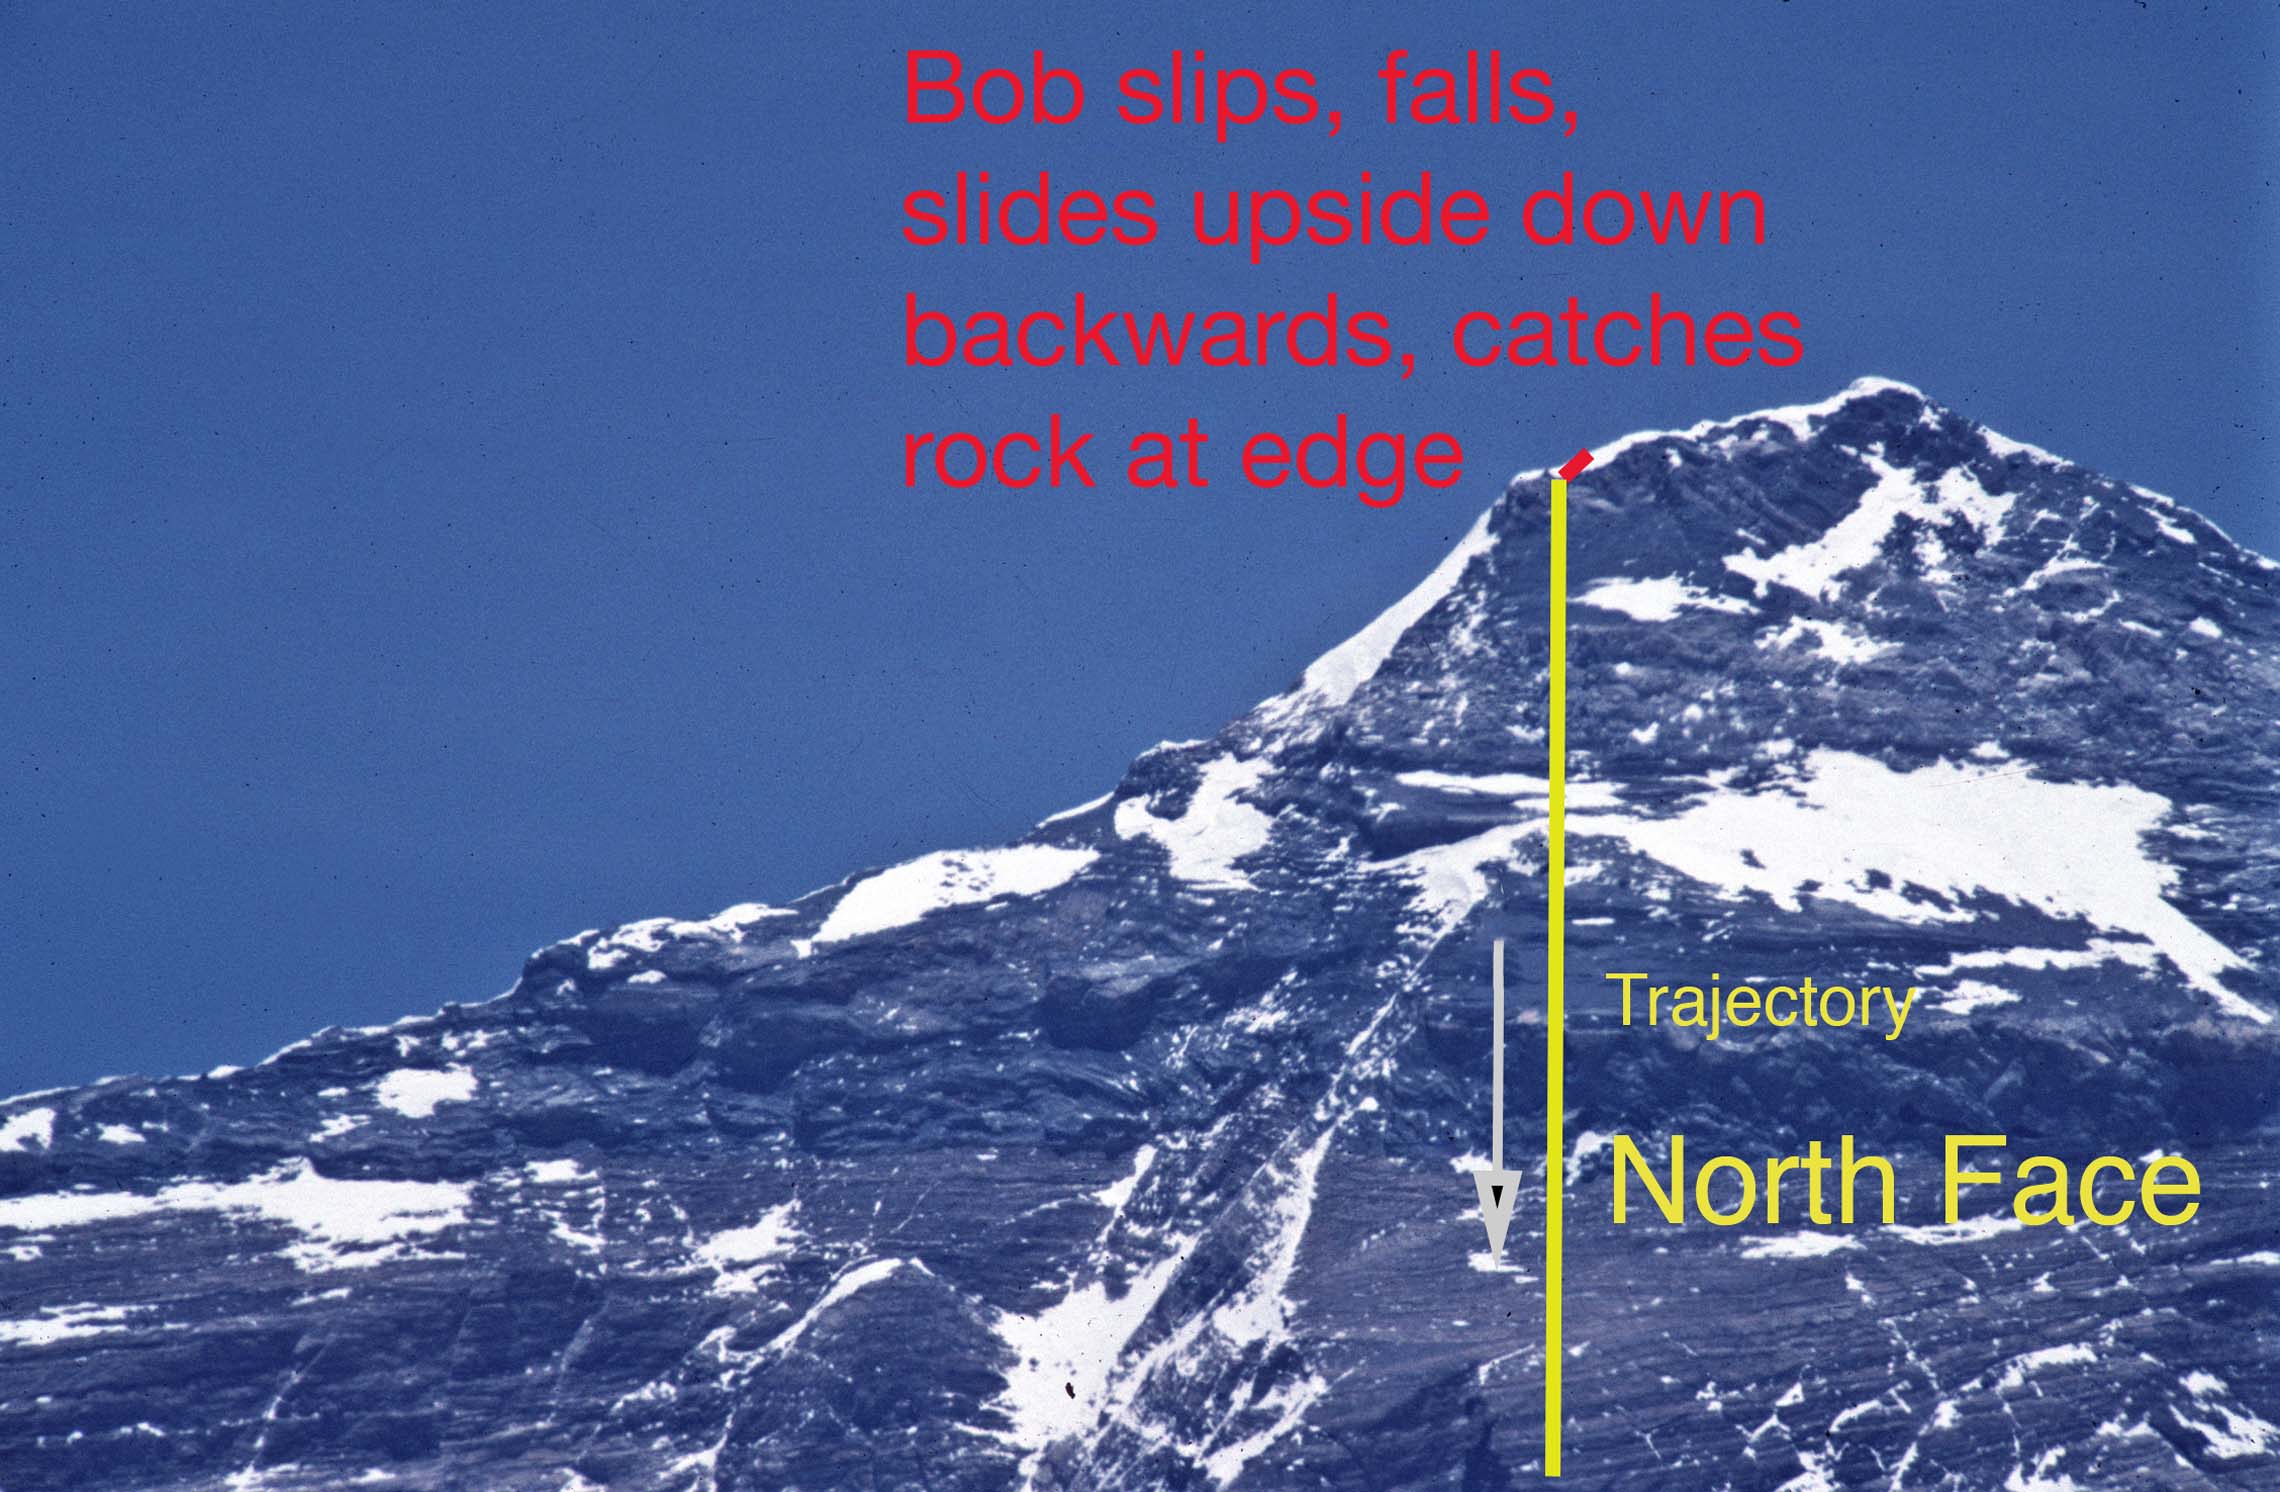 The North Face of Mount Everest